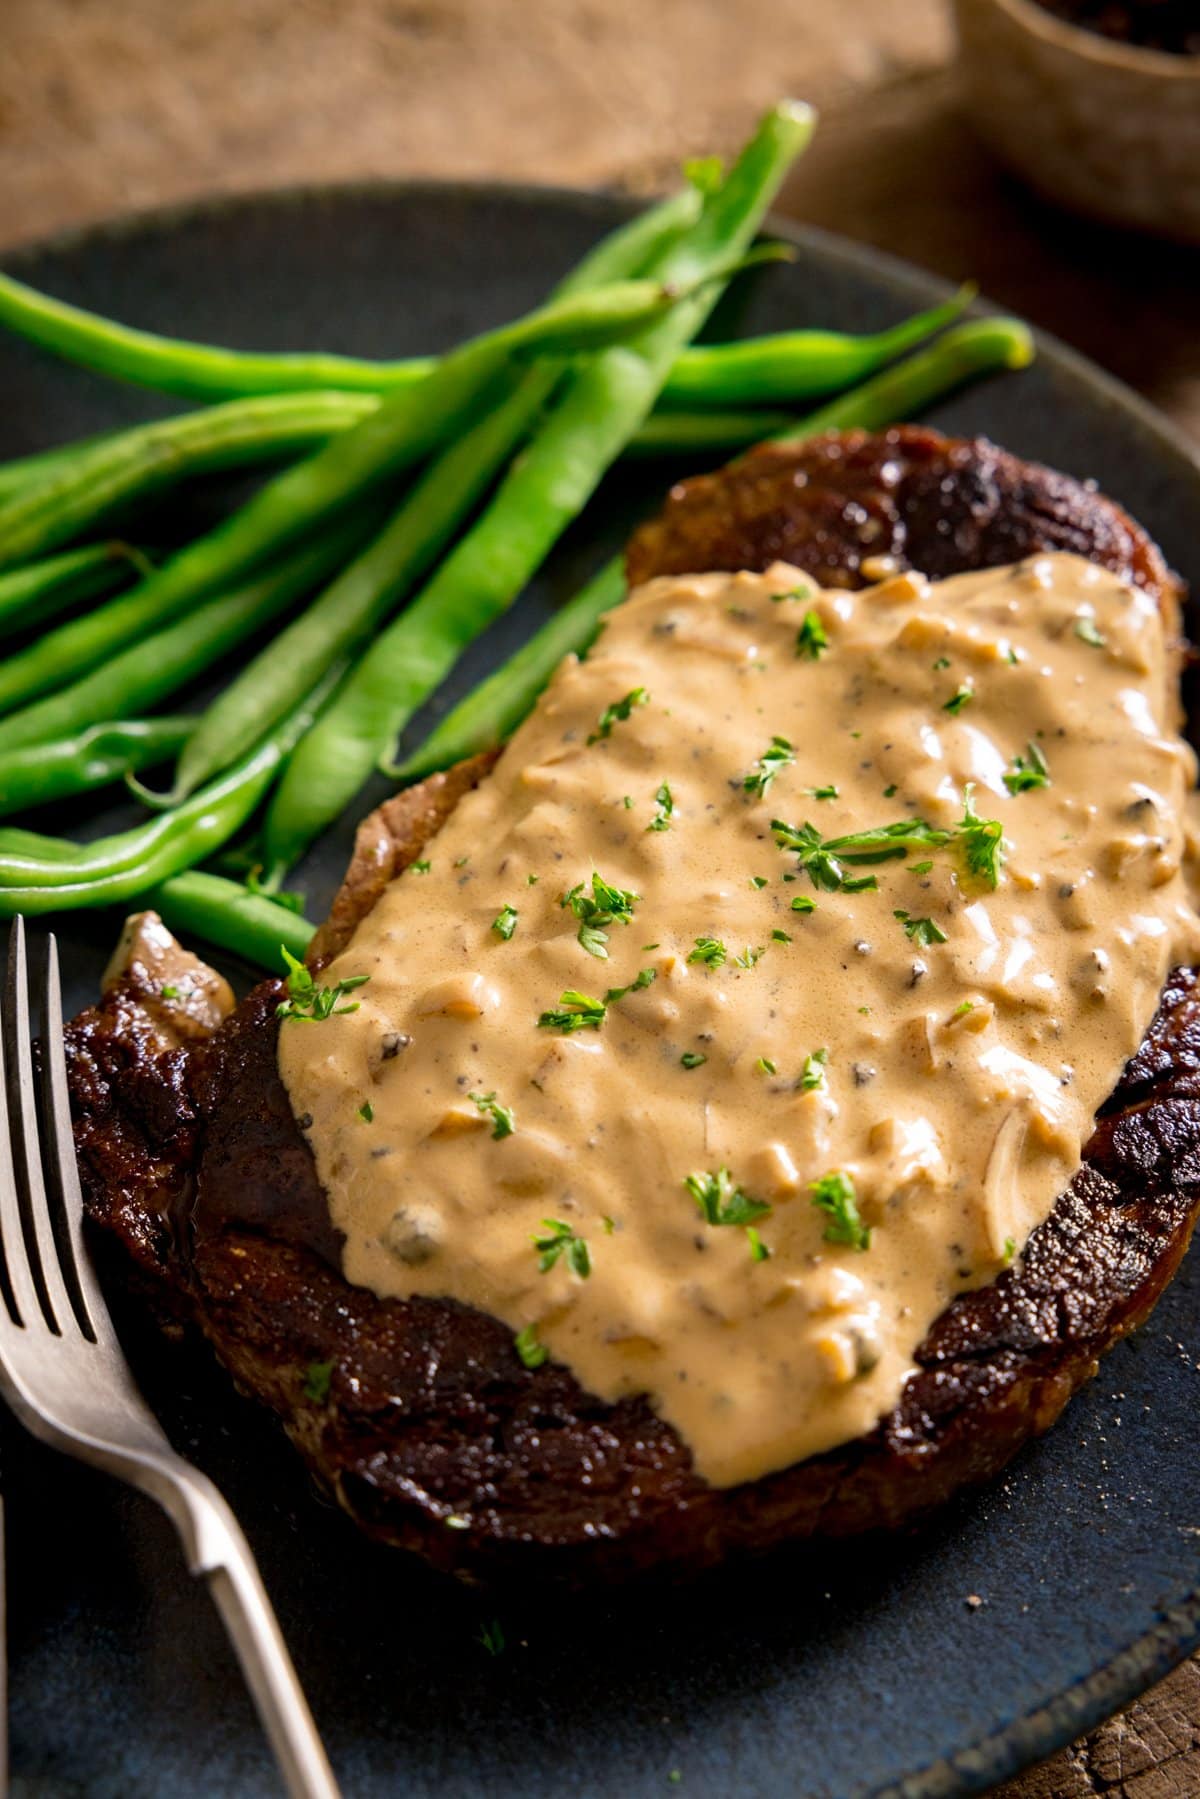 A tall image of a cooked steak with peppercorn sauce, served with green beans on a blue plate. There is a fork on the plate.